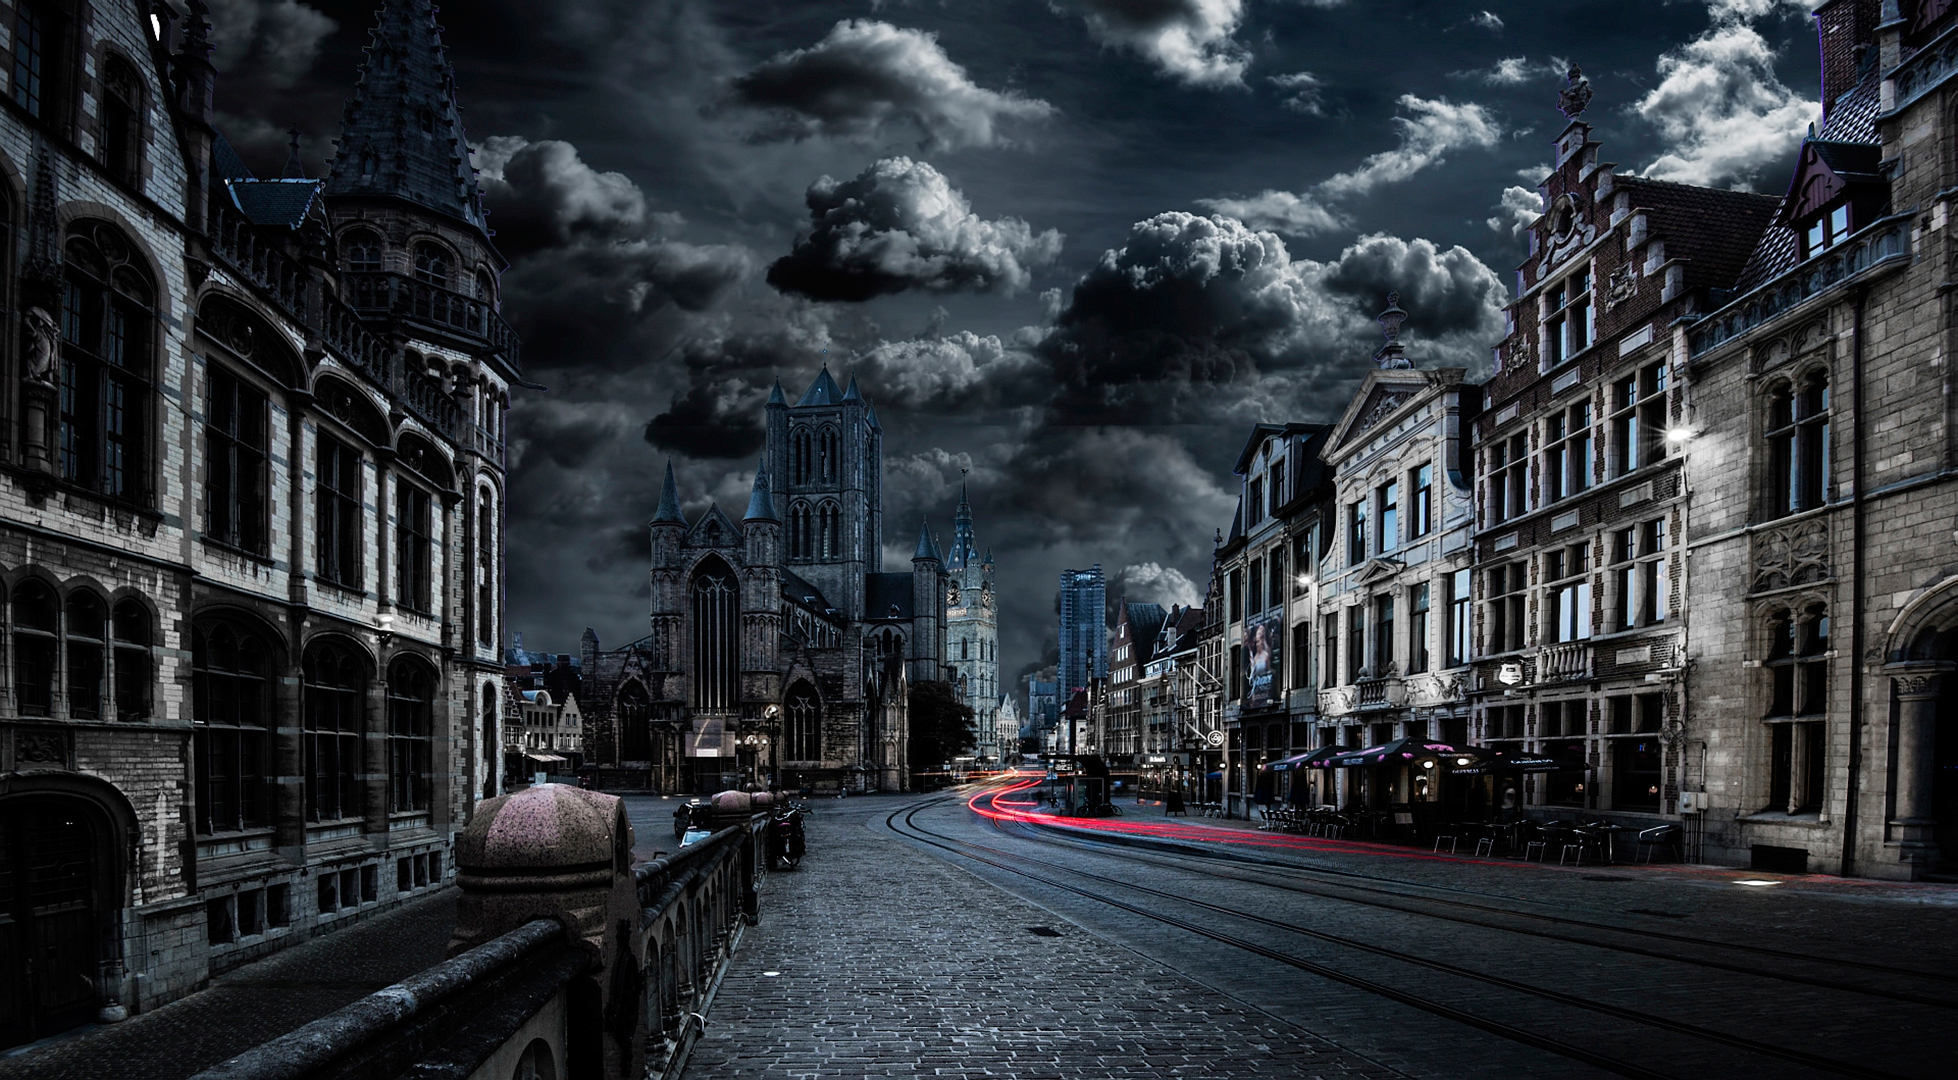 belgium, man made, ghent, architecture, blue, building, cathedral, city, cloud, dark, night, time lapse, town, towns